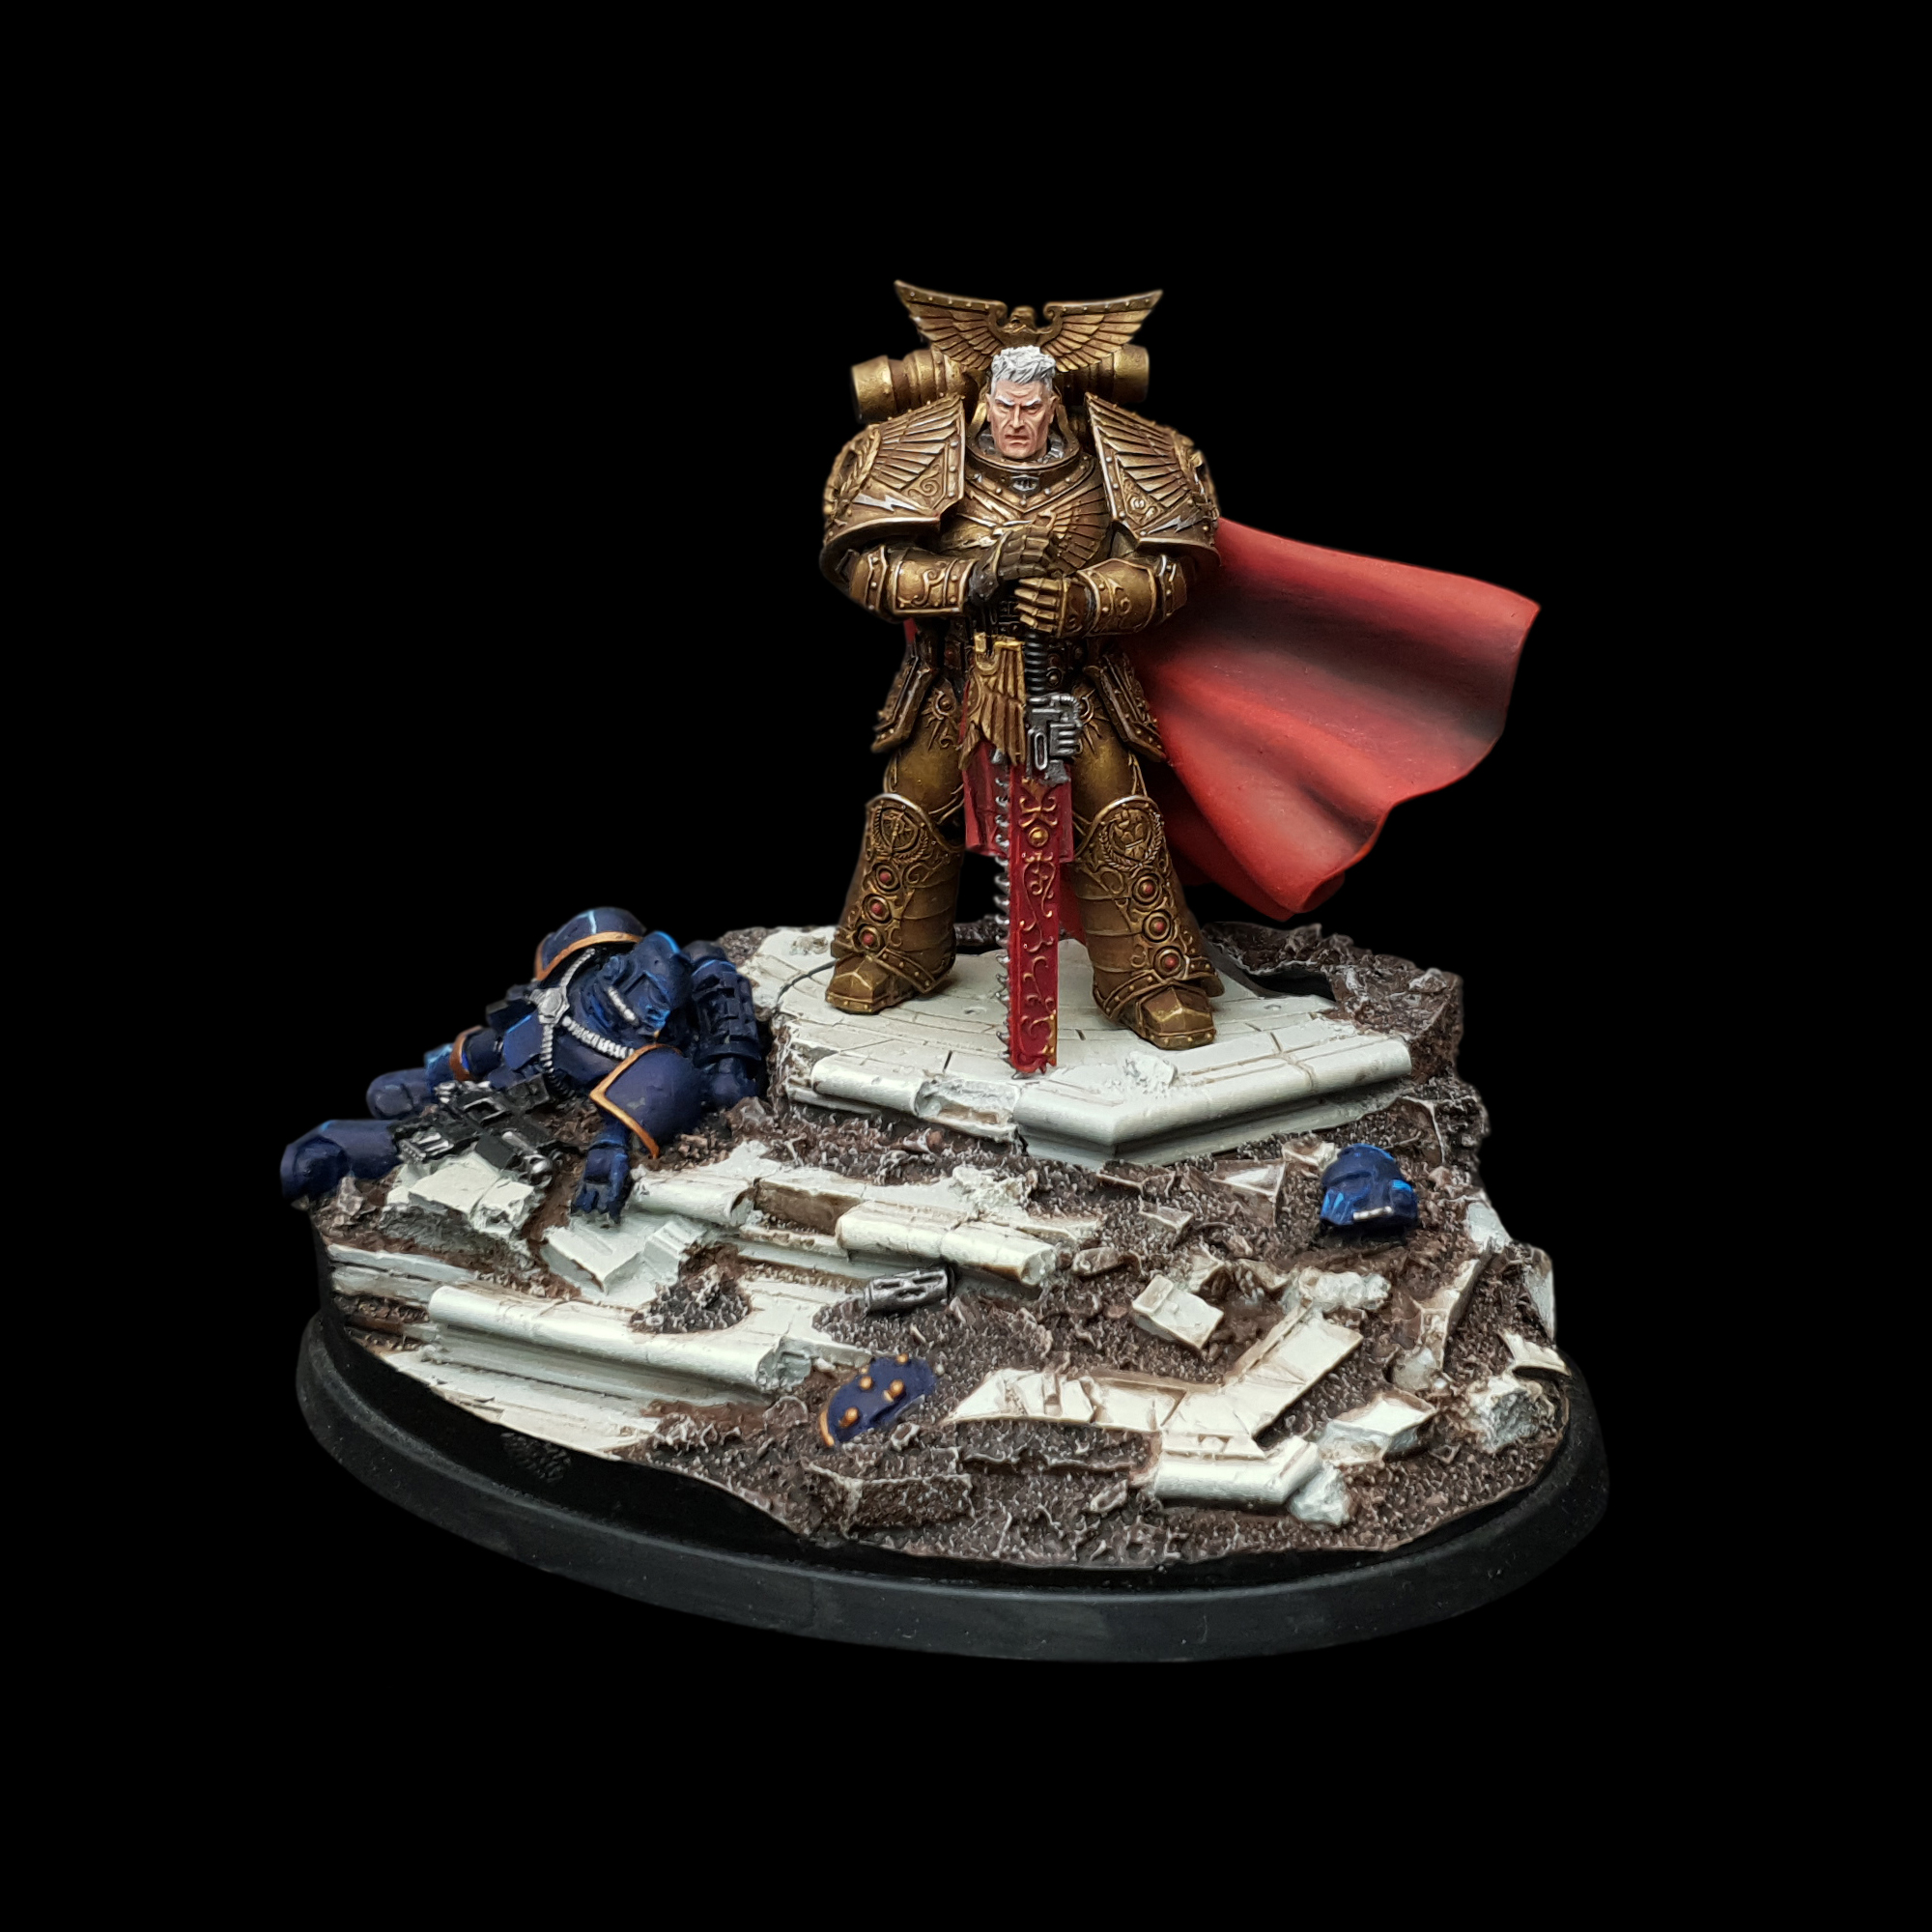 Warhammer 30k Miniature of Rogal Dorn, Primarch of the Imperial Fist Legion